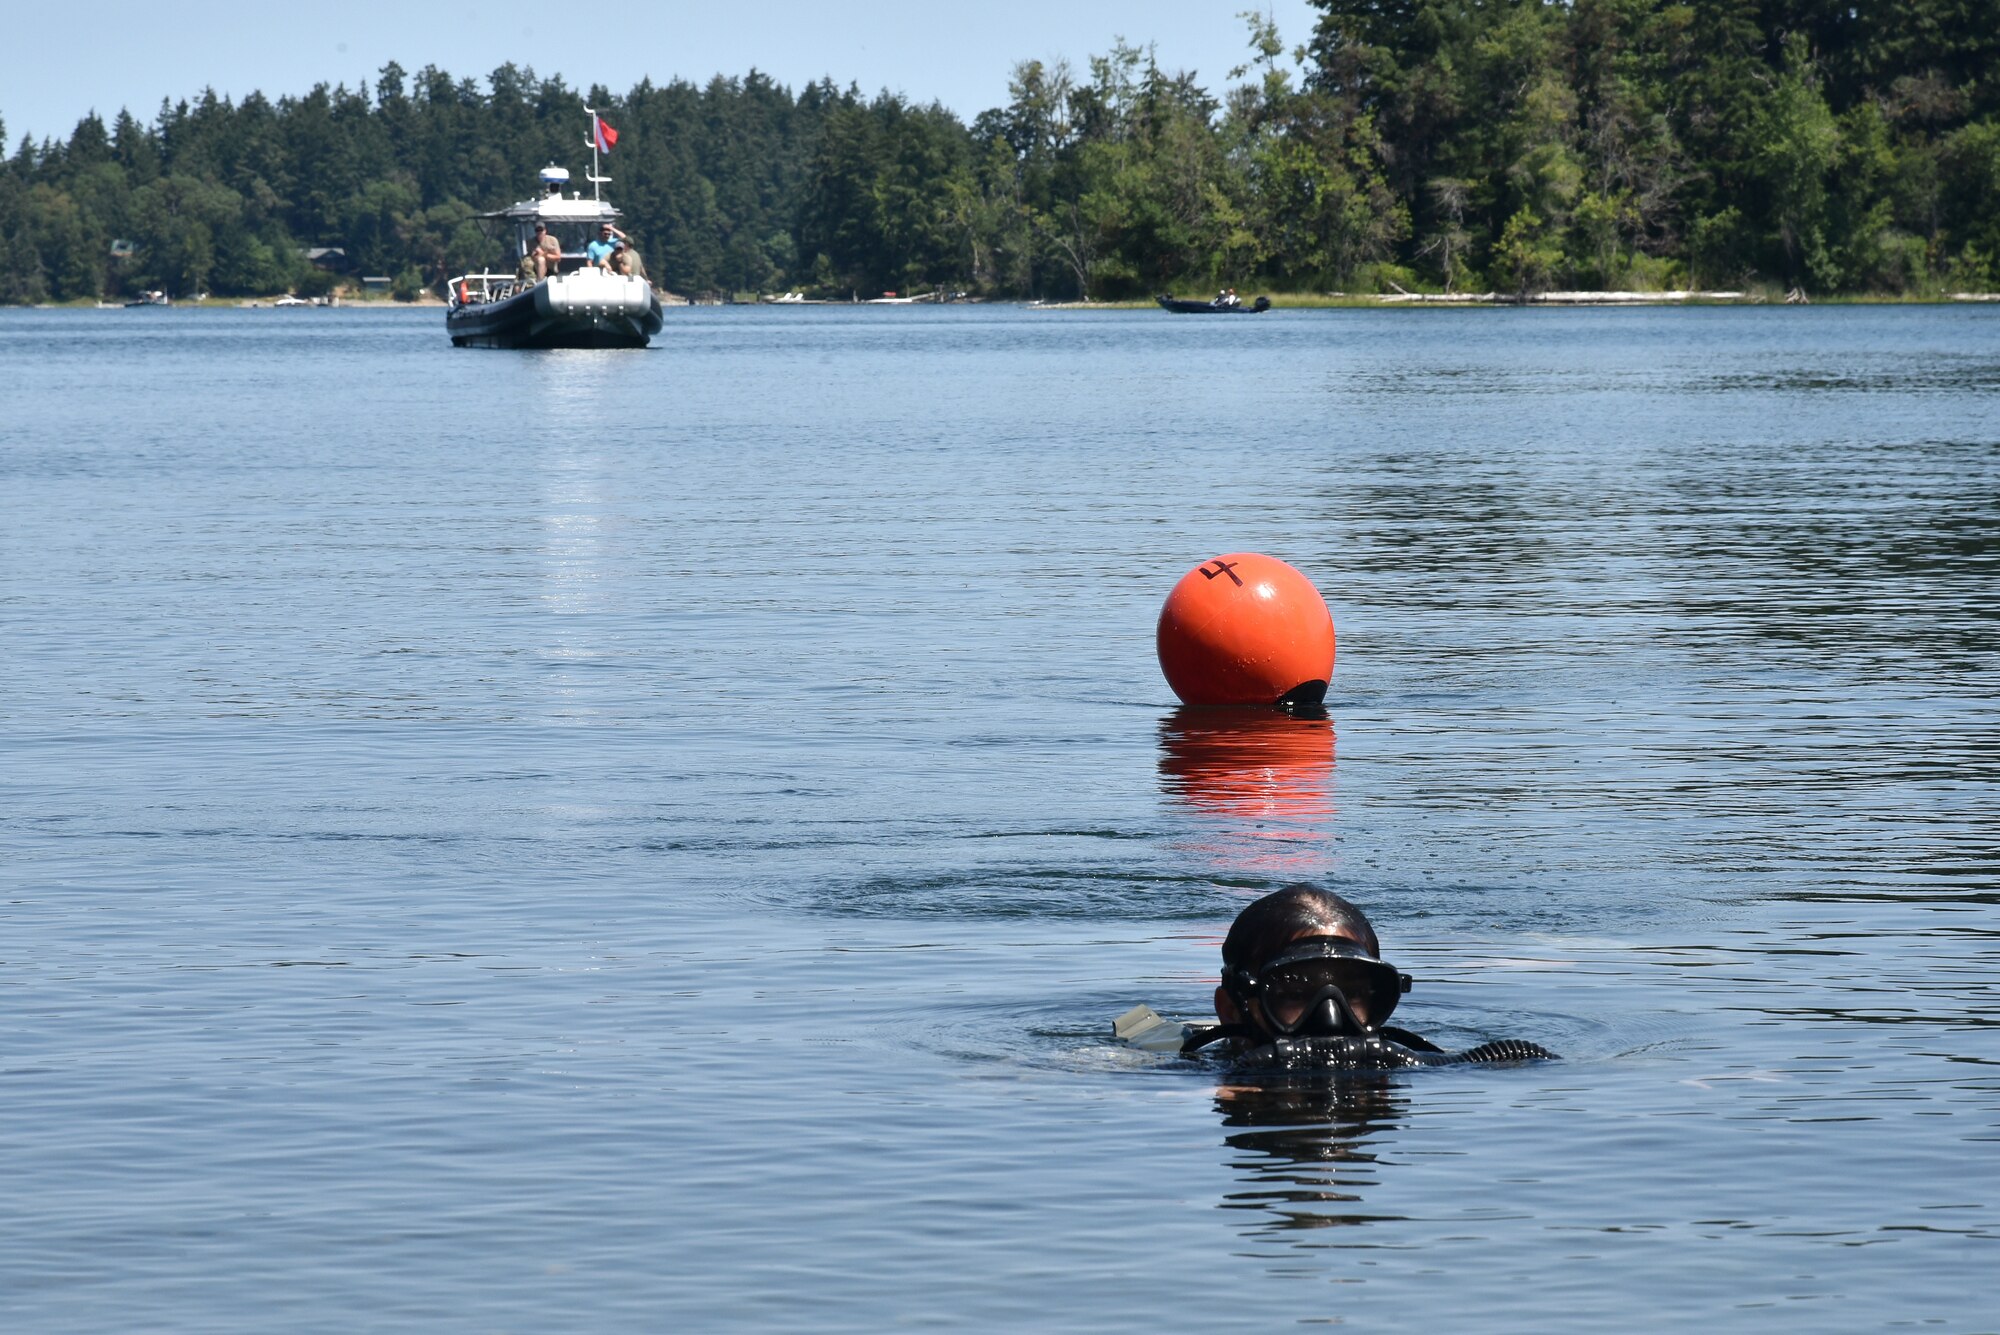 U.S. Air Force 125th Special Tactics Airmen from the Portland Air National Guard Base, along with members of joint forces, participate in closed-circuit dive training at Joint Base Lewis McChord, Wash., July 31, 2020.  Special Tactics operators were conducted dives and training on new equipment.